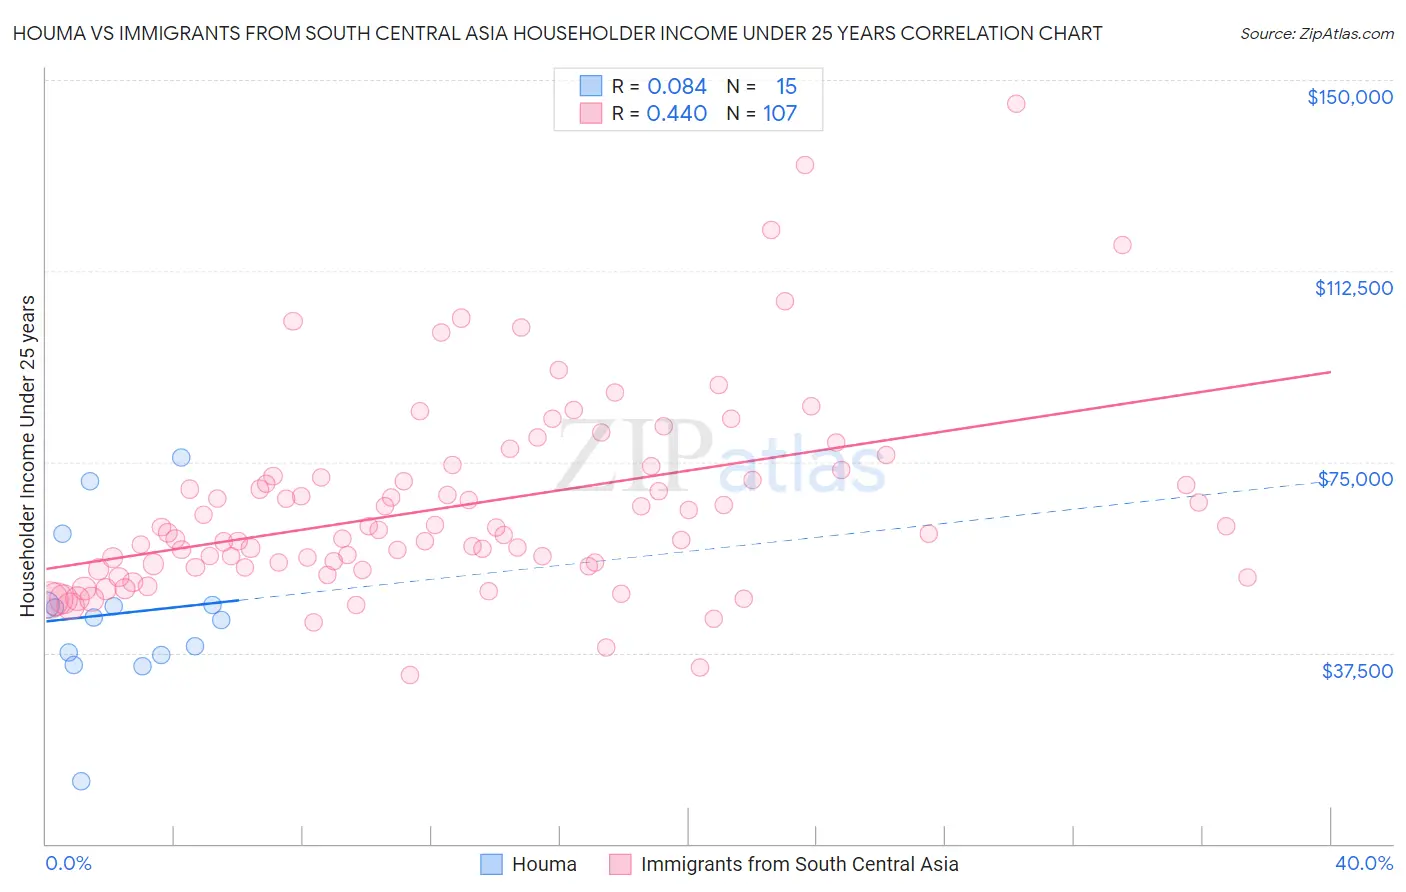 Houma vs Immigrants from South Central Asia Householder Income Under 25 years